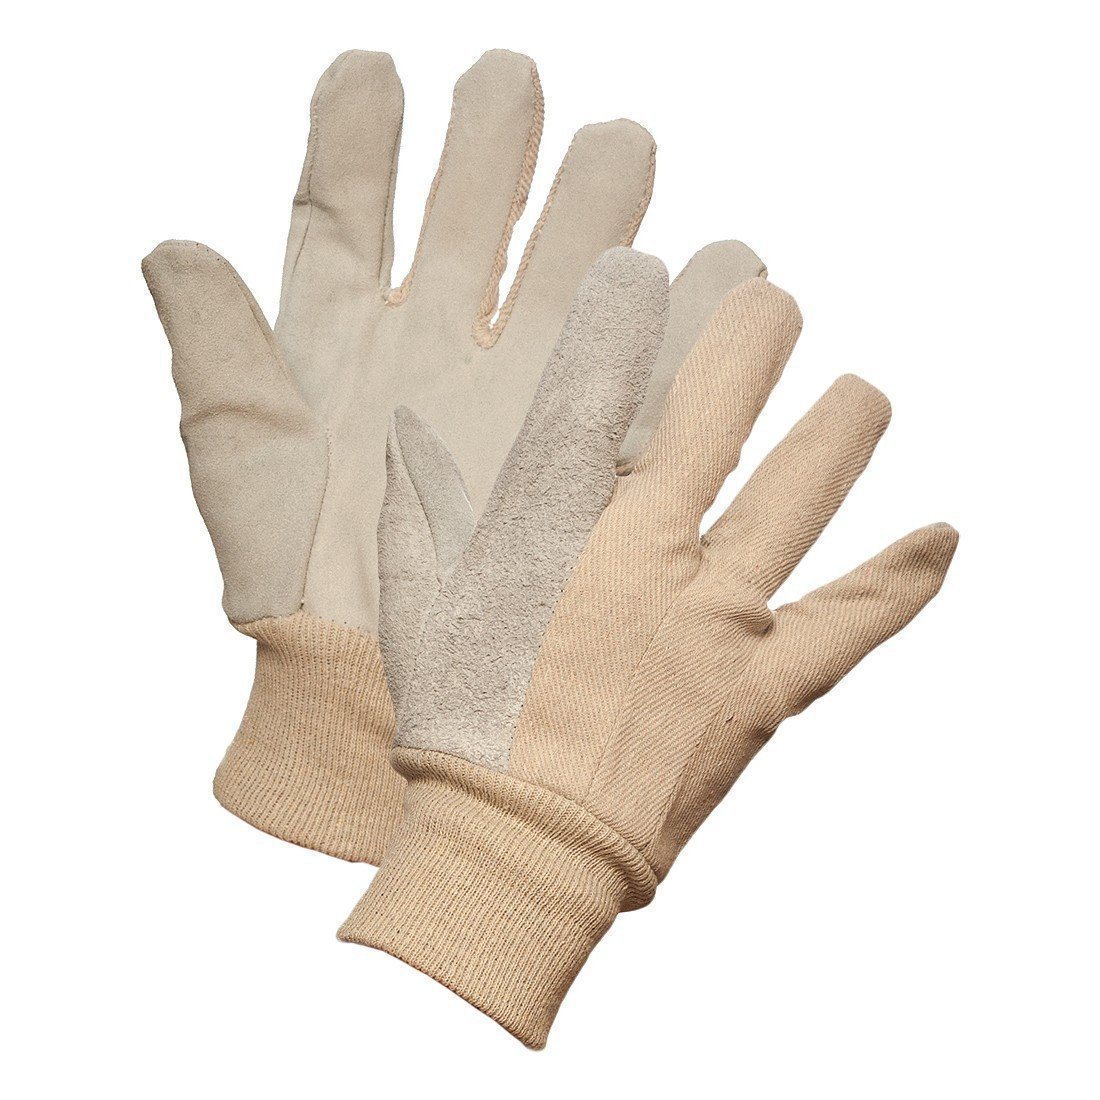 Leather Palm Work Gloves with Knit Wrist - Hi Vis Safety